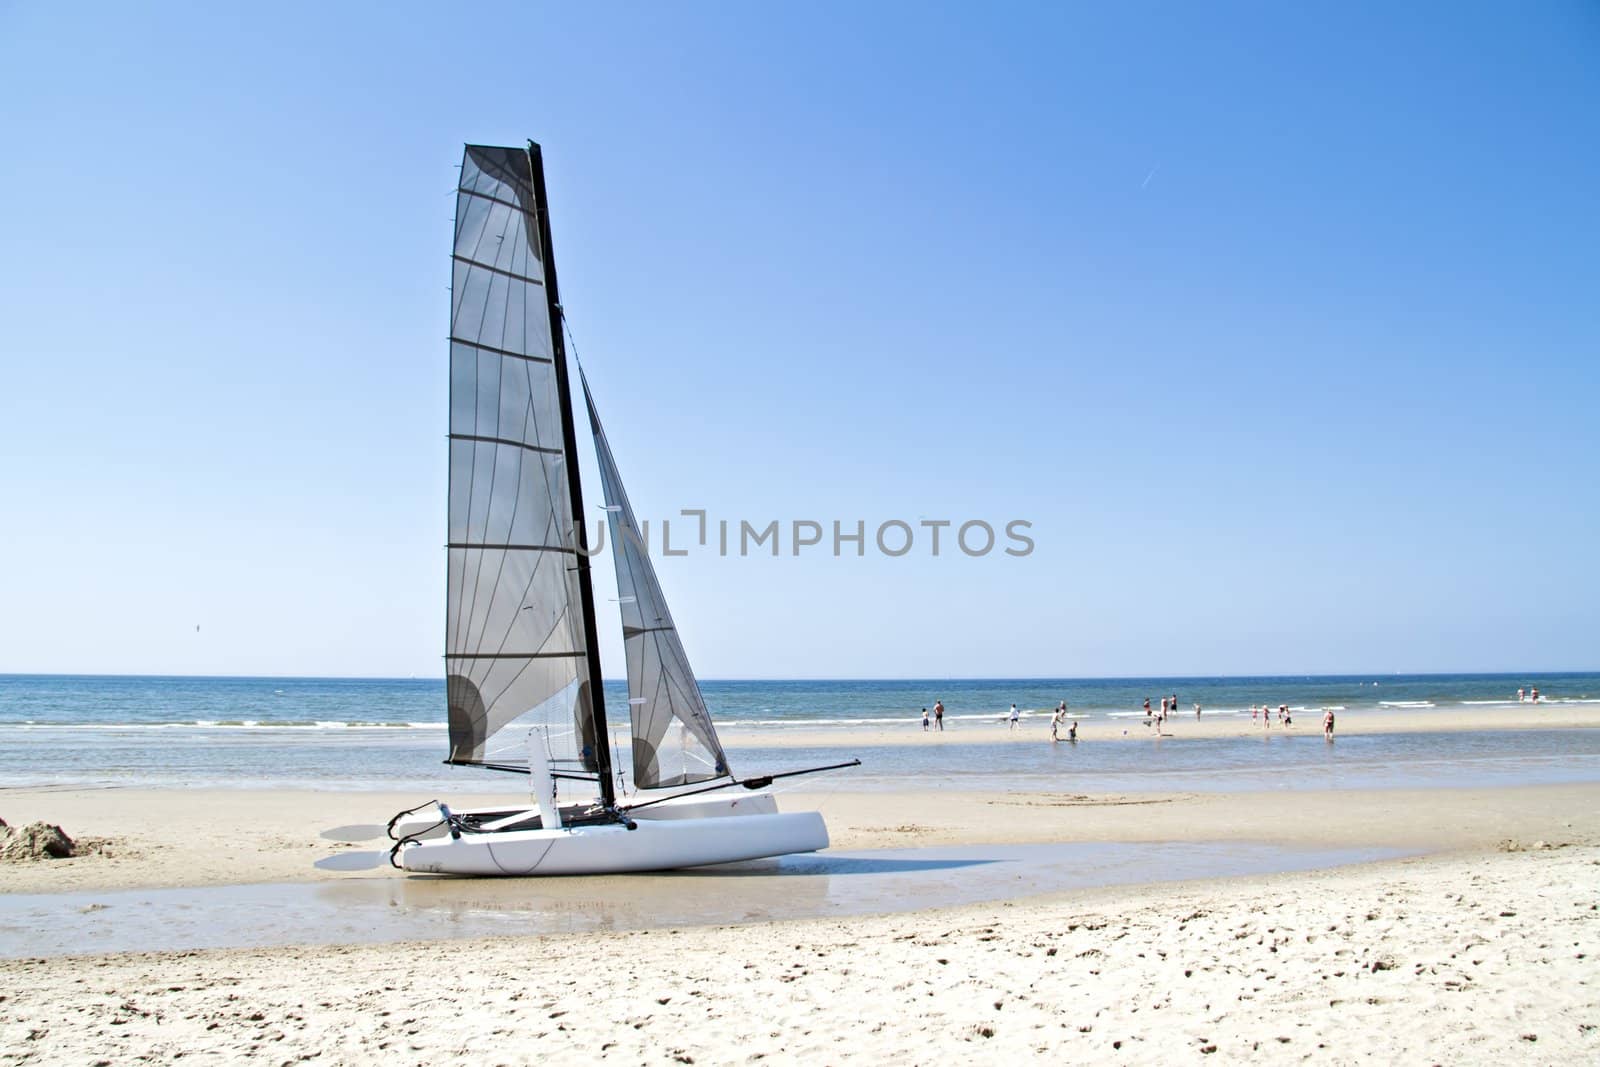 Catamaran at the beach from the north sea in the Netherlands by devy